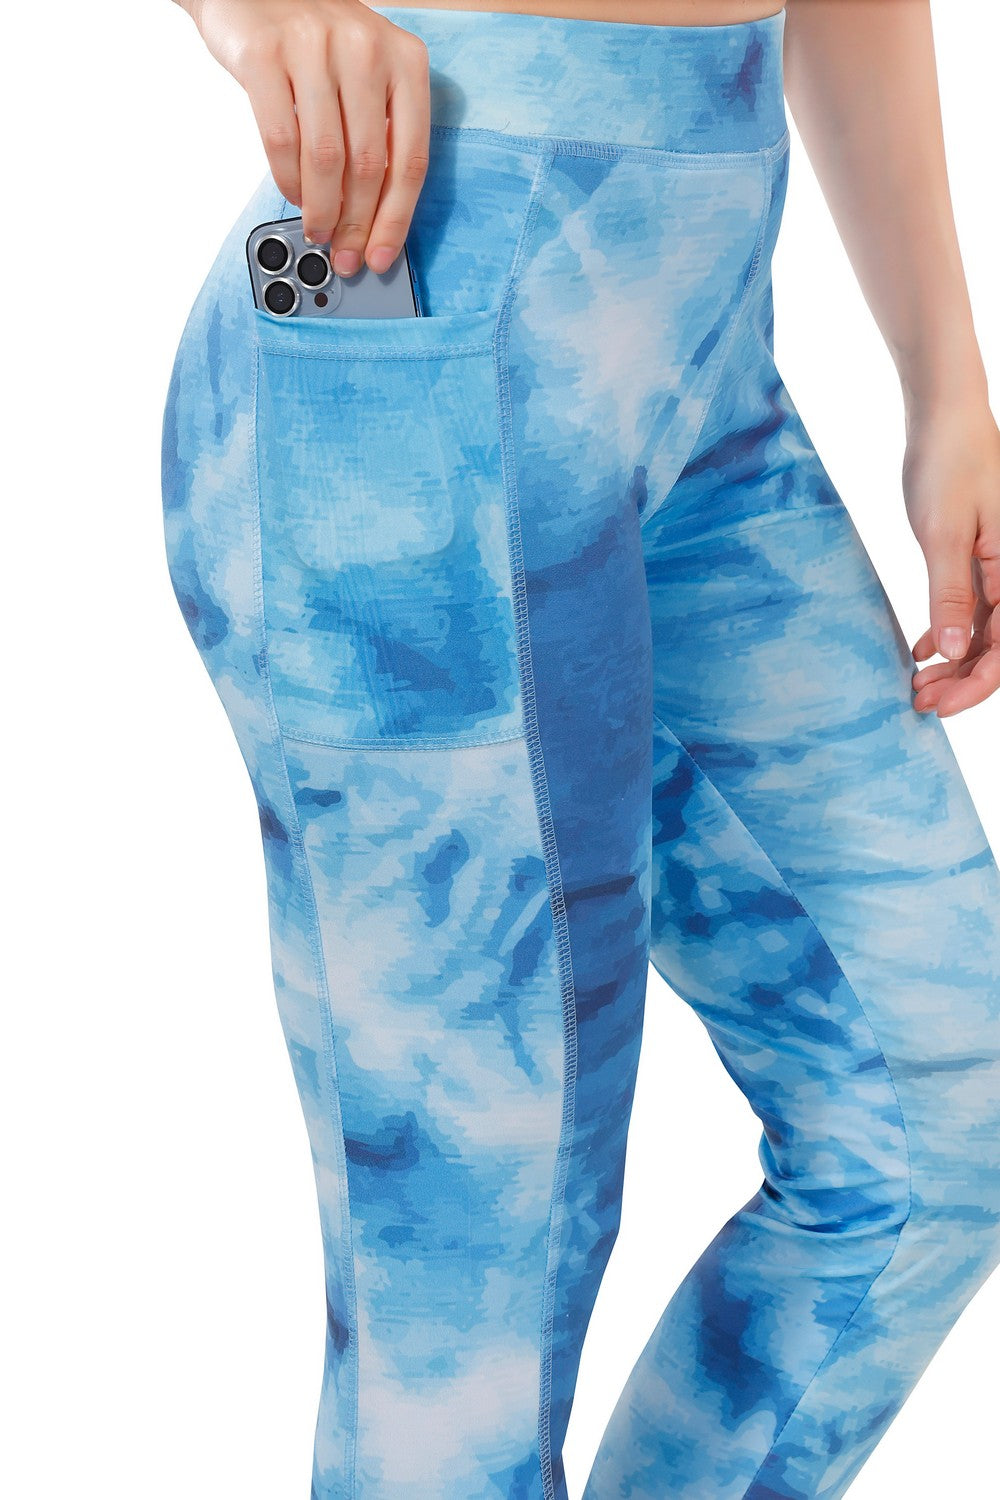 TRASA Active High Waist Printed Yoga Pants for Women's - Blue Camouflage